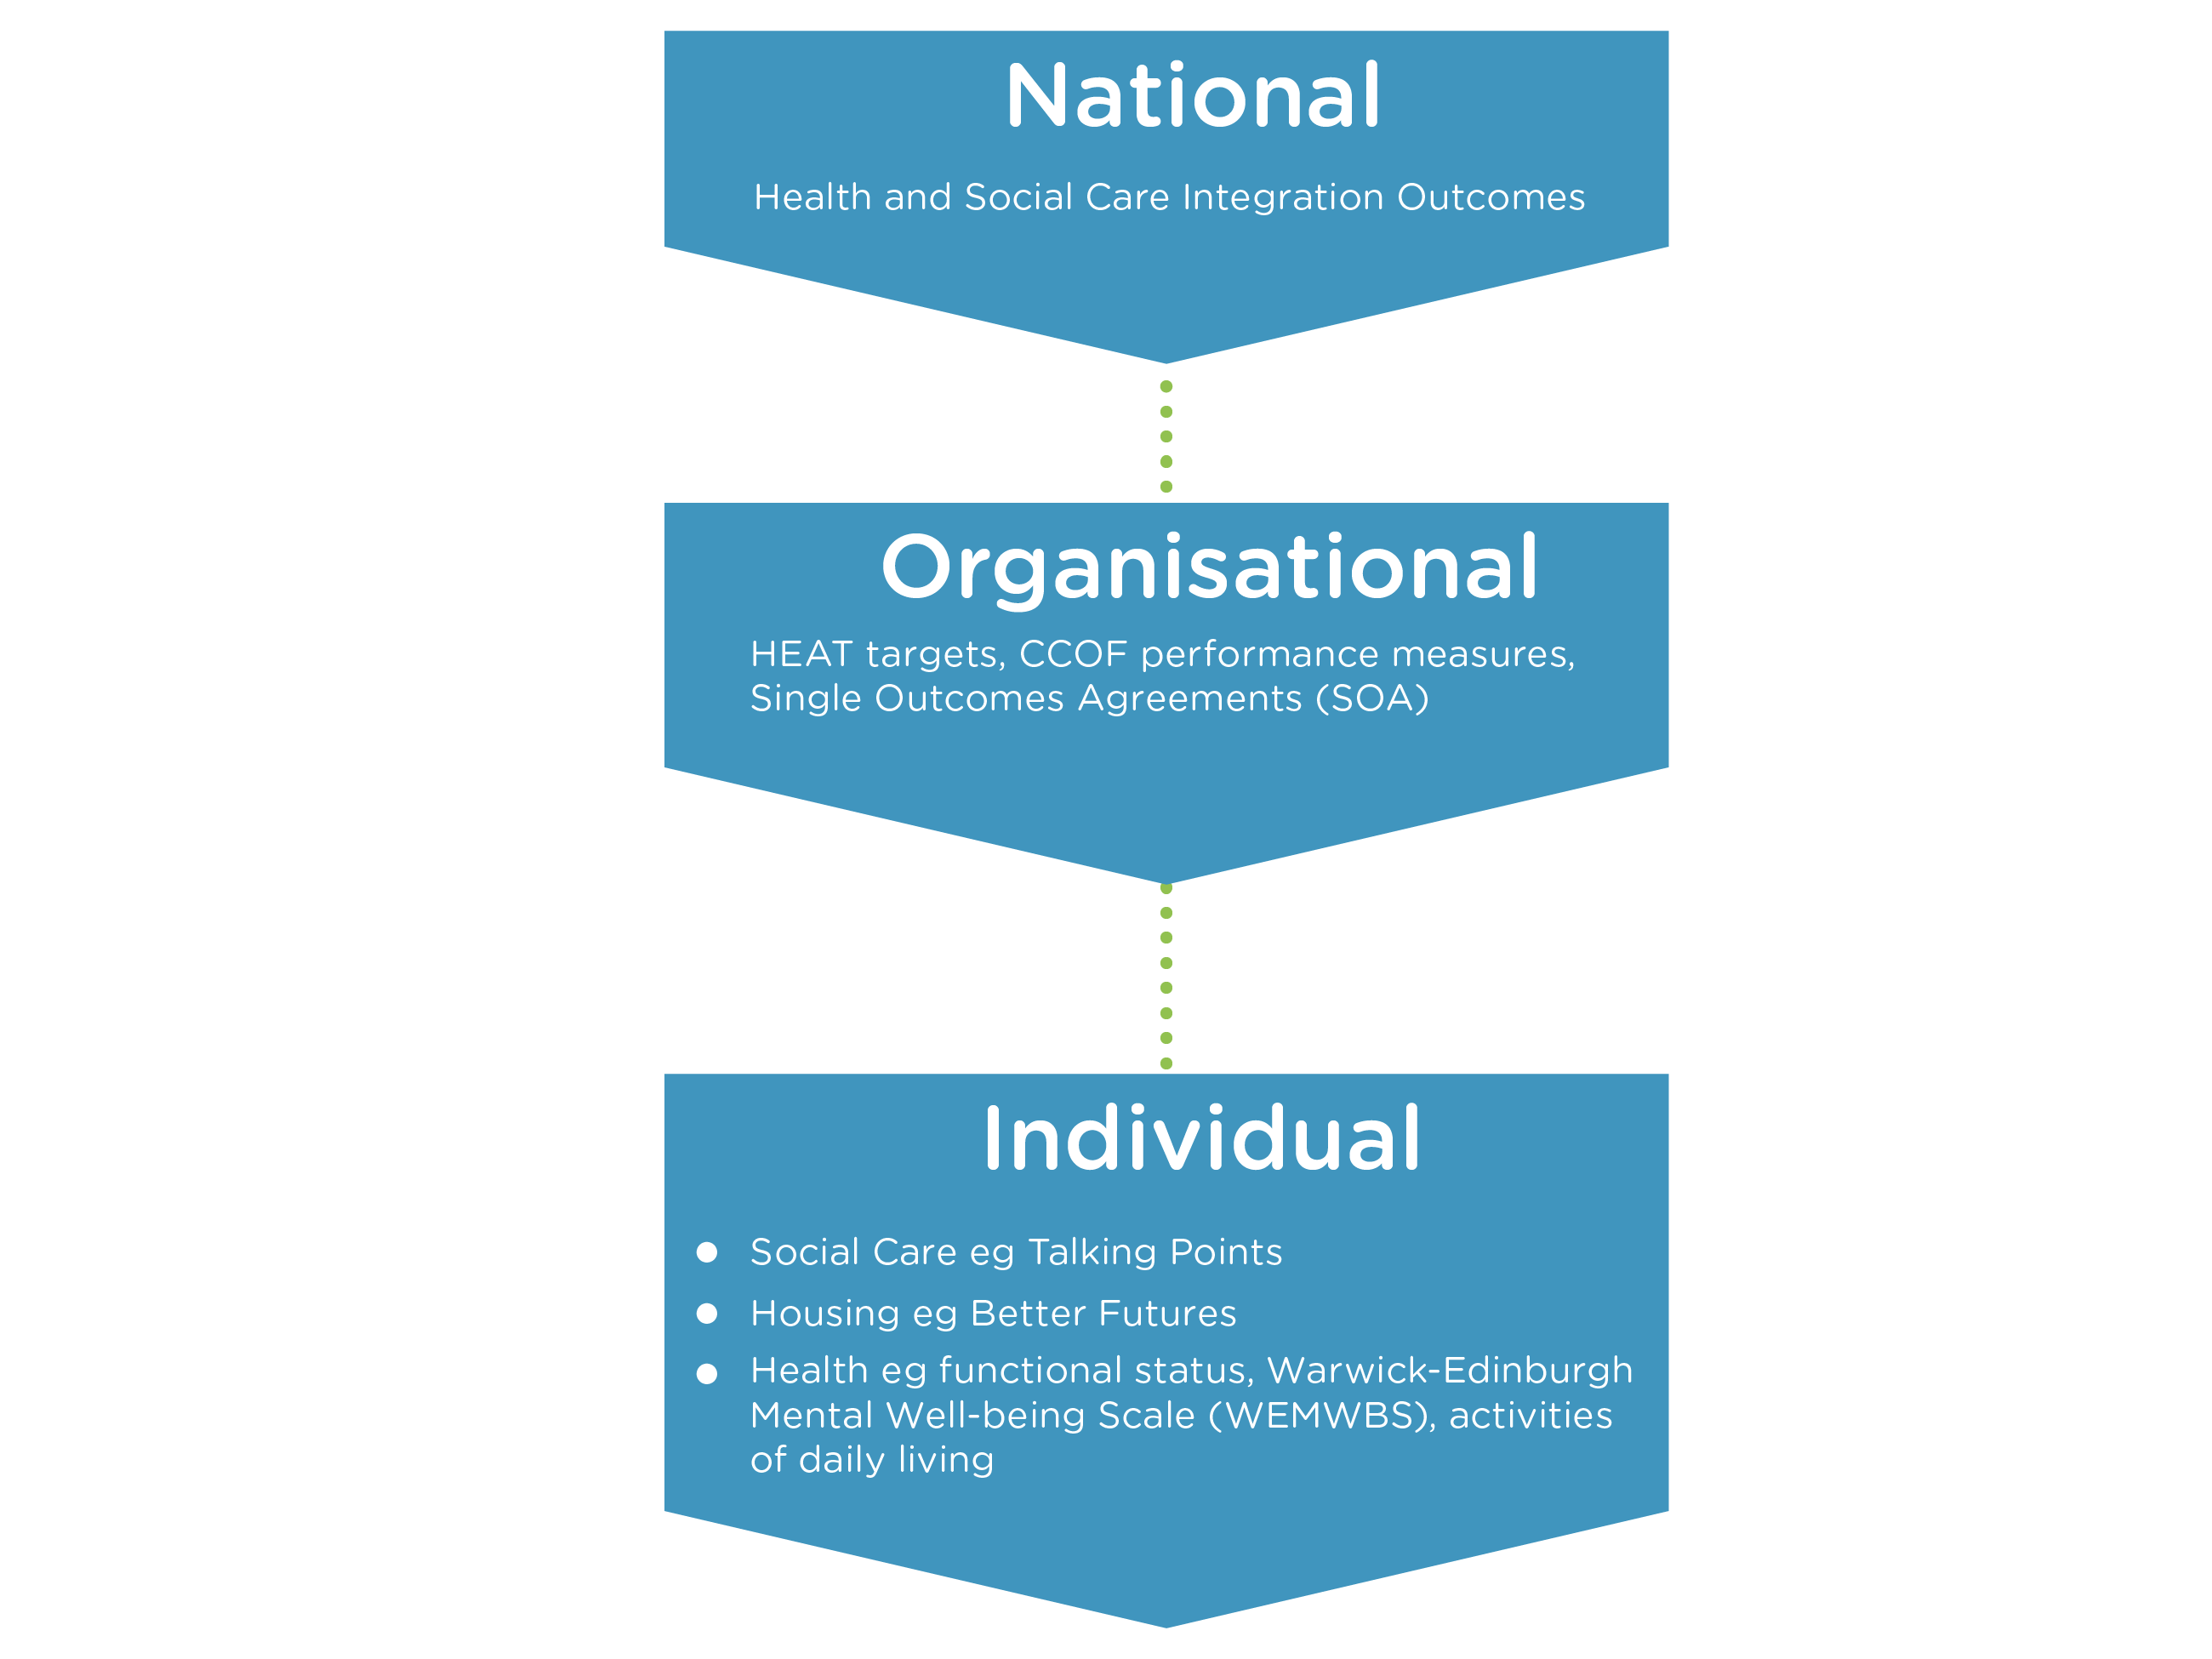 National, eg Health and Social Care Integration Outcomes. Organisational, eg HEAT targets, CCOF performance measures, Single Outcomes Agreements (SOA). Individual, Social Care eg Talking Points, Housing eg Better Futures, Health eg functional status, Warwick-Edinburgh Mental Well-being Scale (WEMWBS), activities of daily living.